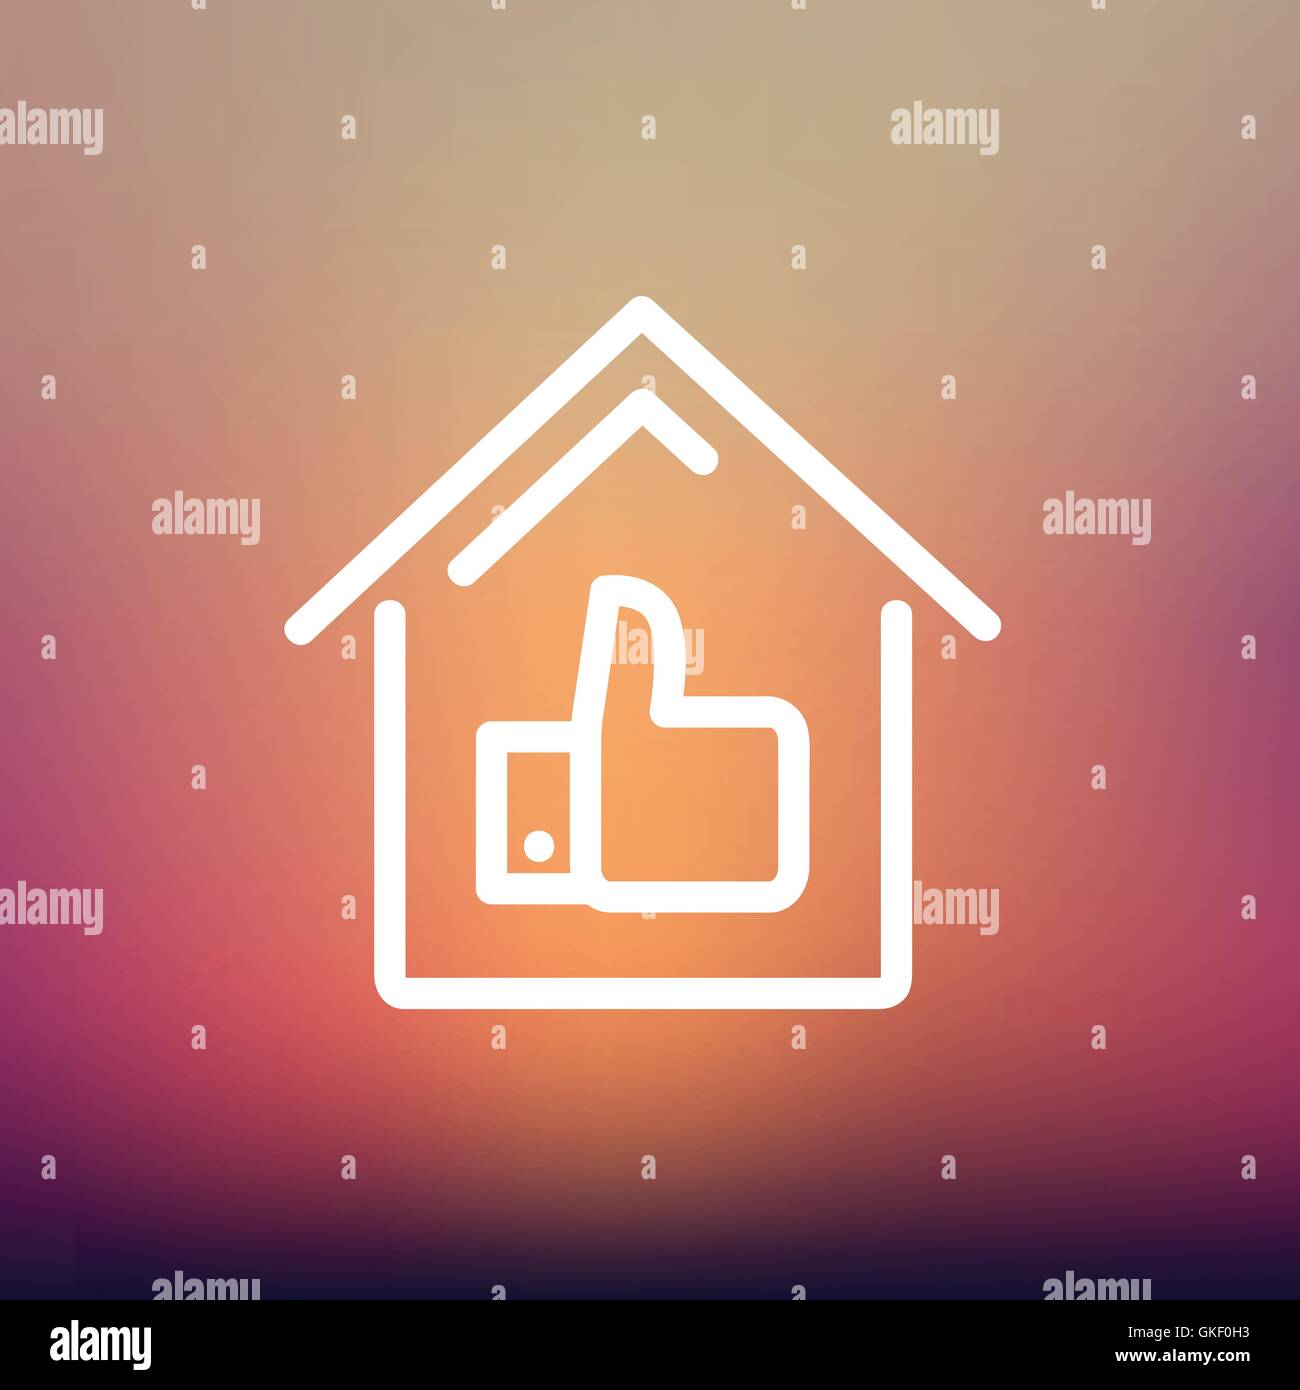 Approved housing loan thin line icon Stock Vector